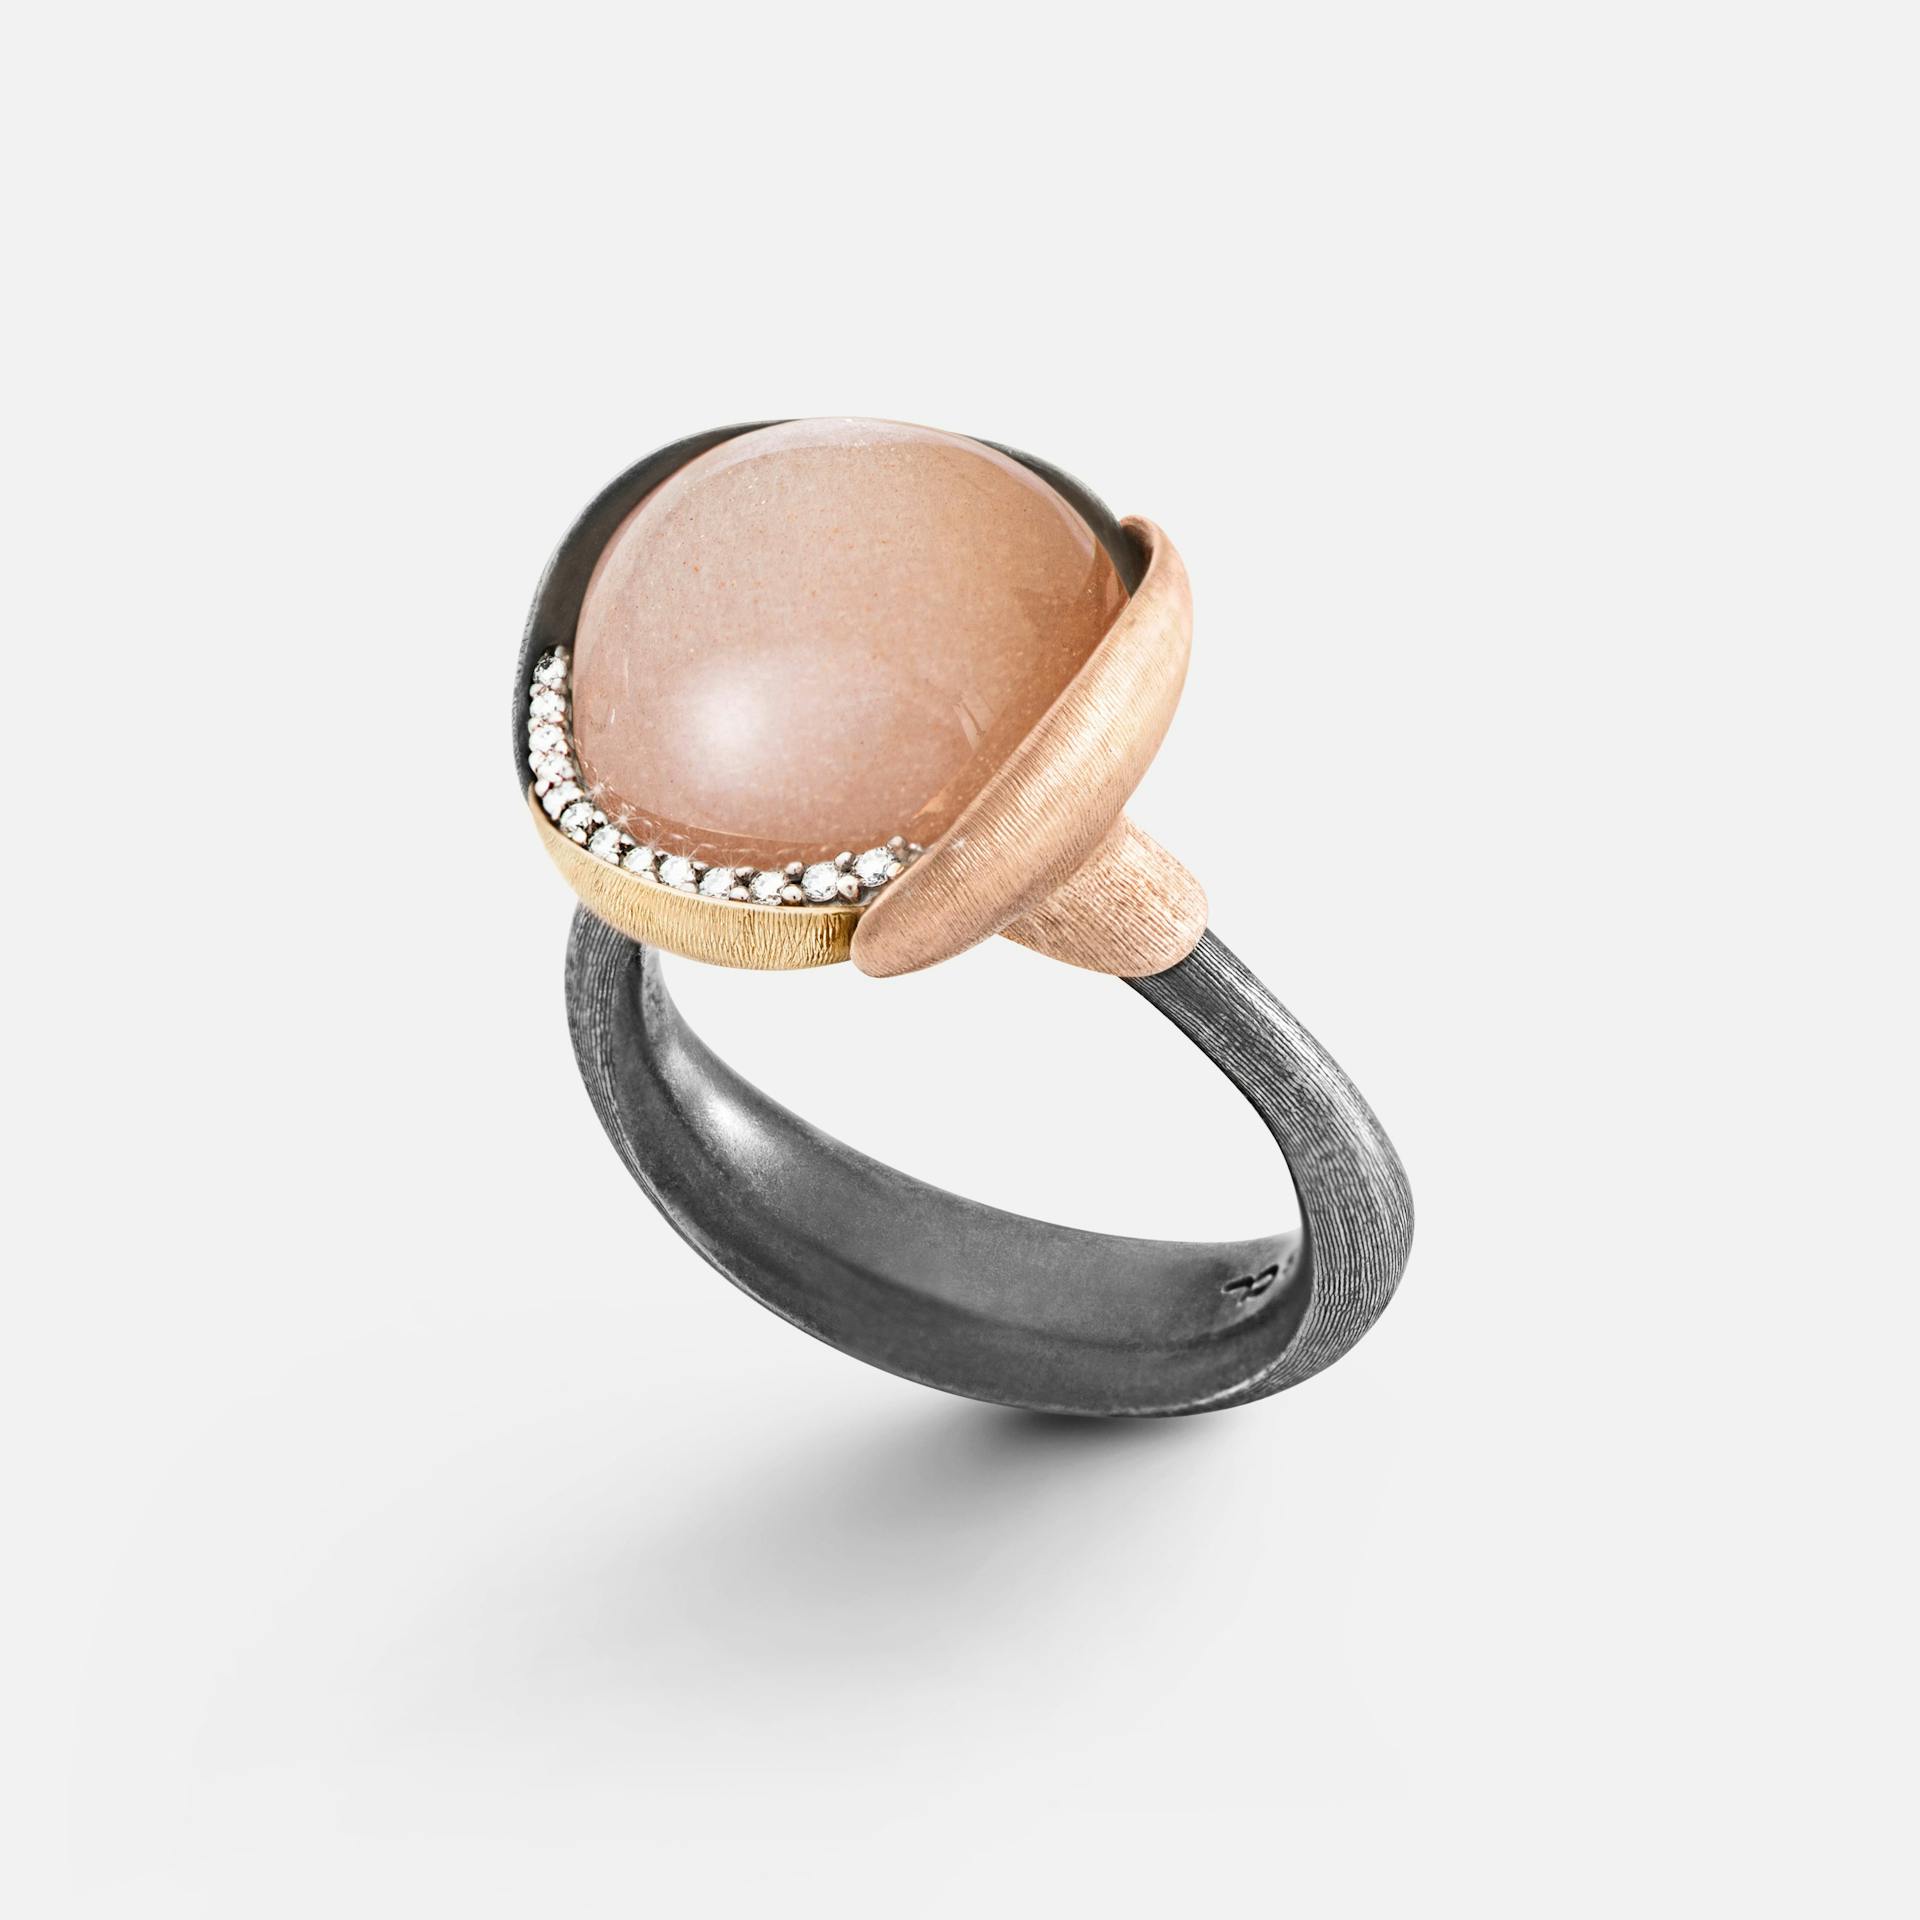 Ole Lynggaard Copenhagen Lotus Ring in Gold & Sterling Silver with Diamonds & Blush Moonstone